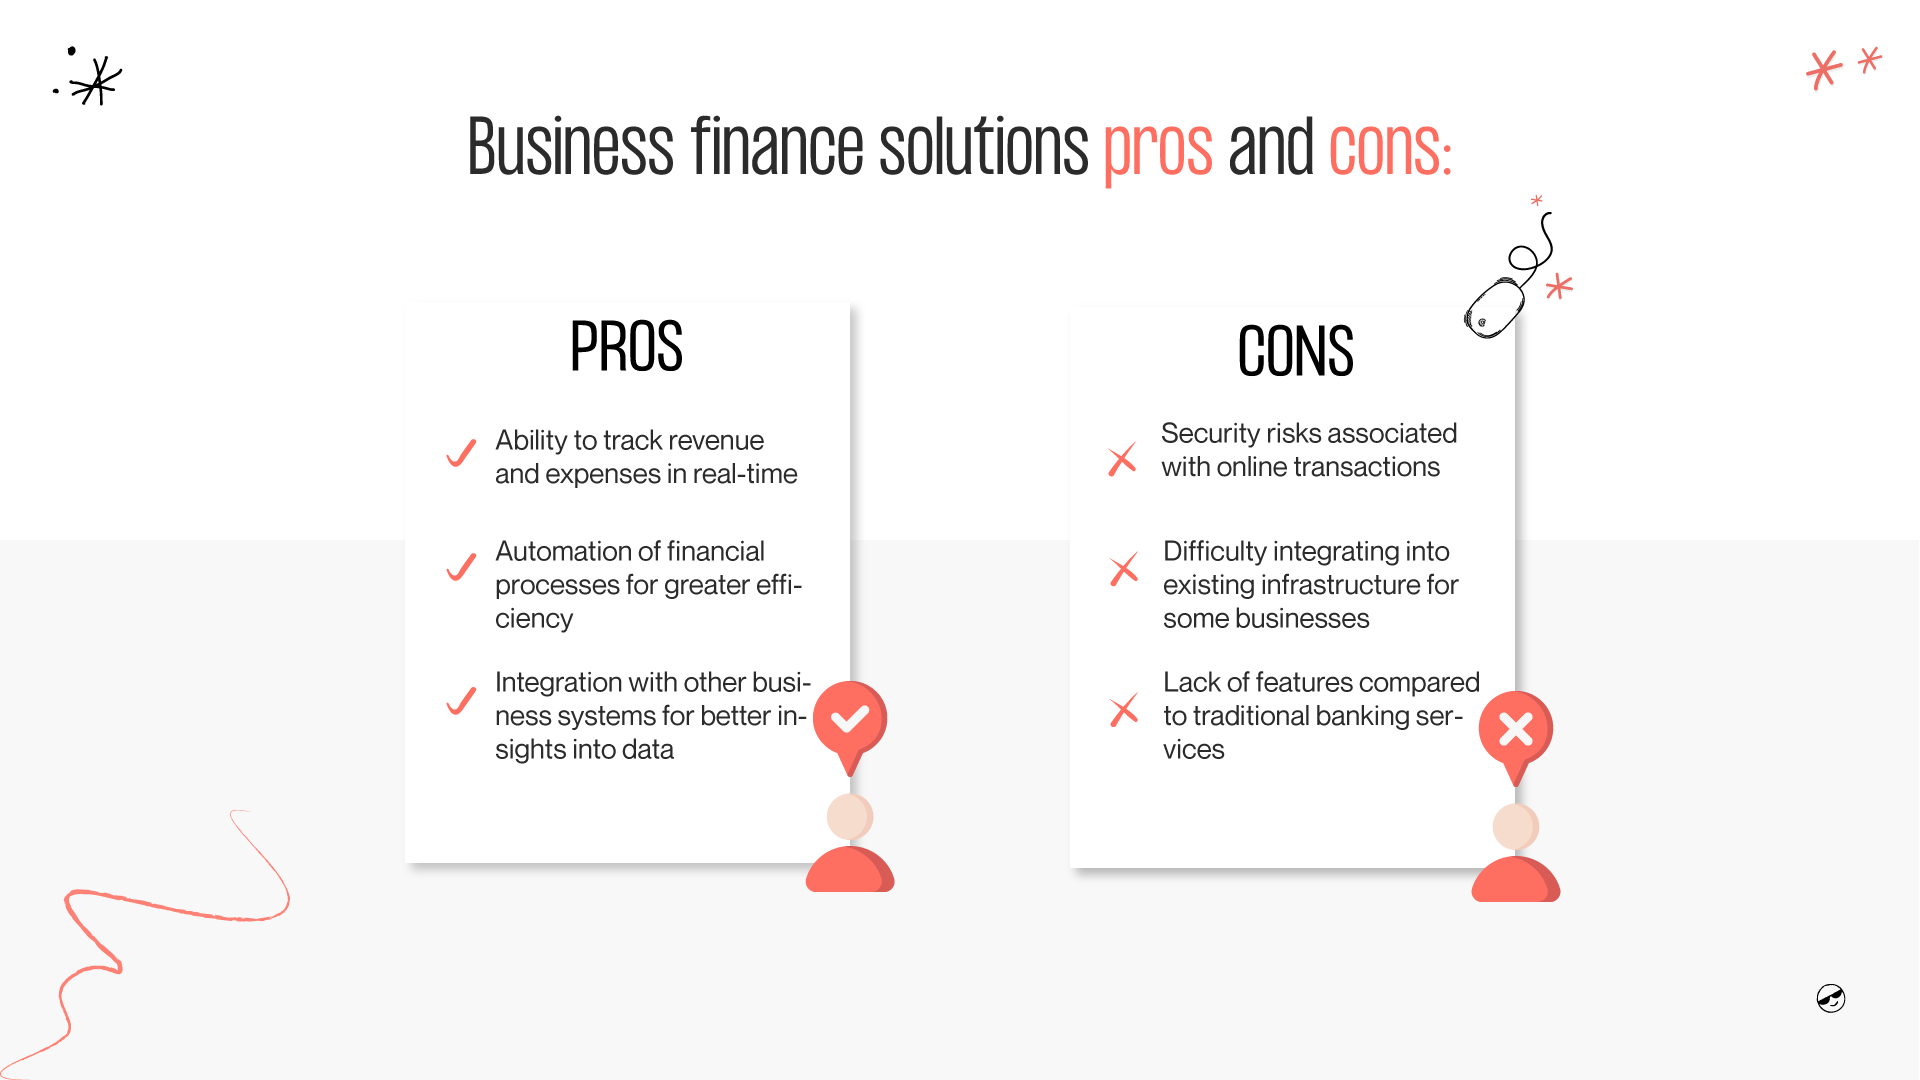 Business finance solutions pros and cons